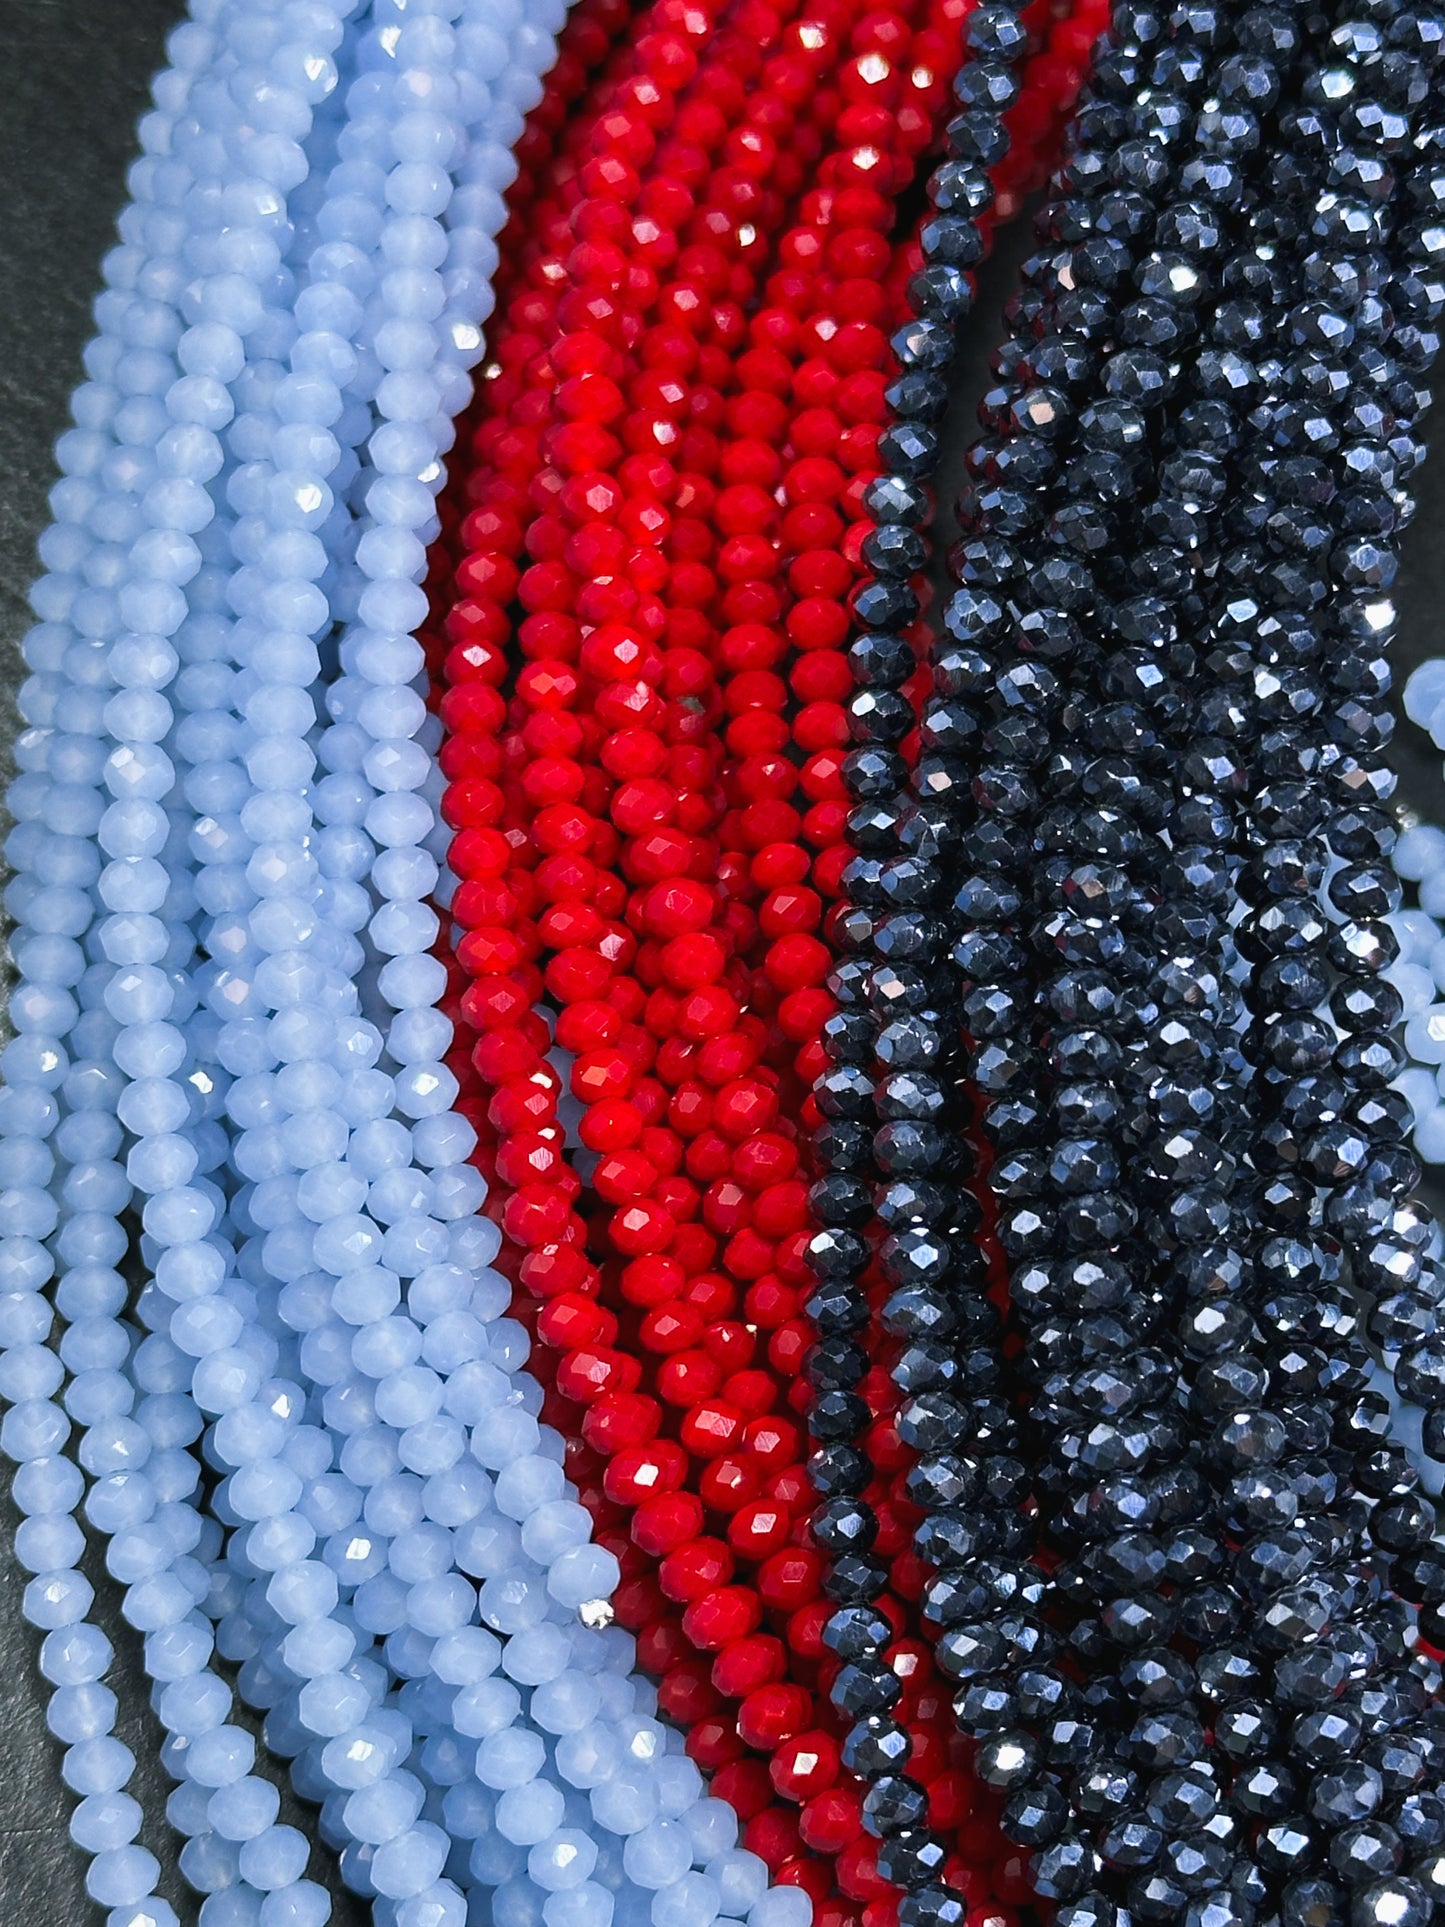 BULK! 4680 Beads 3mm Faceted Rondelle Crystal Glass Spacer Beads | 20 Strands per Bundle, 26 inch FULL Strands! Great for Jewelry Making